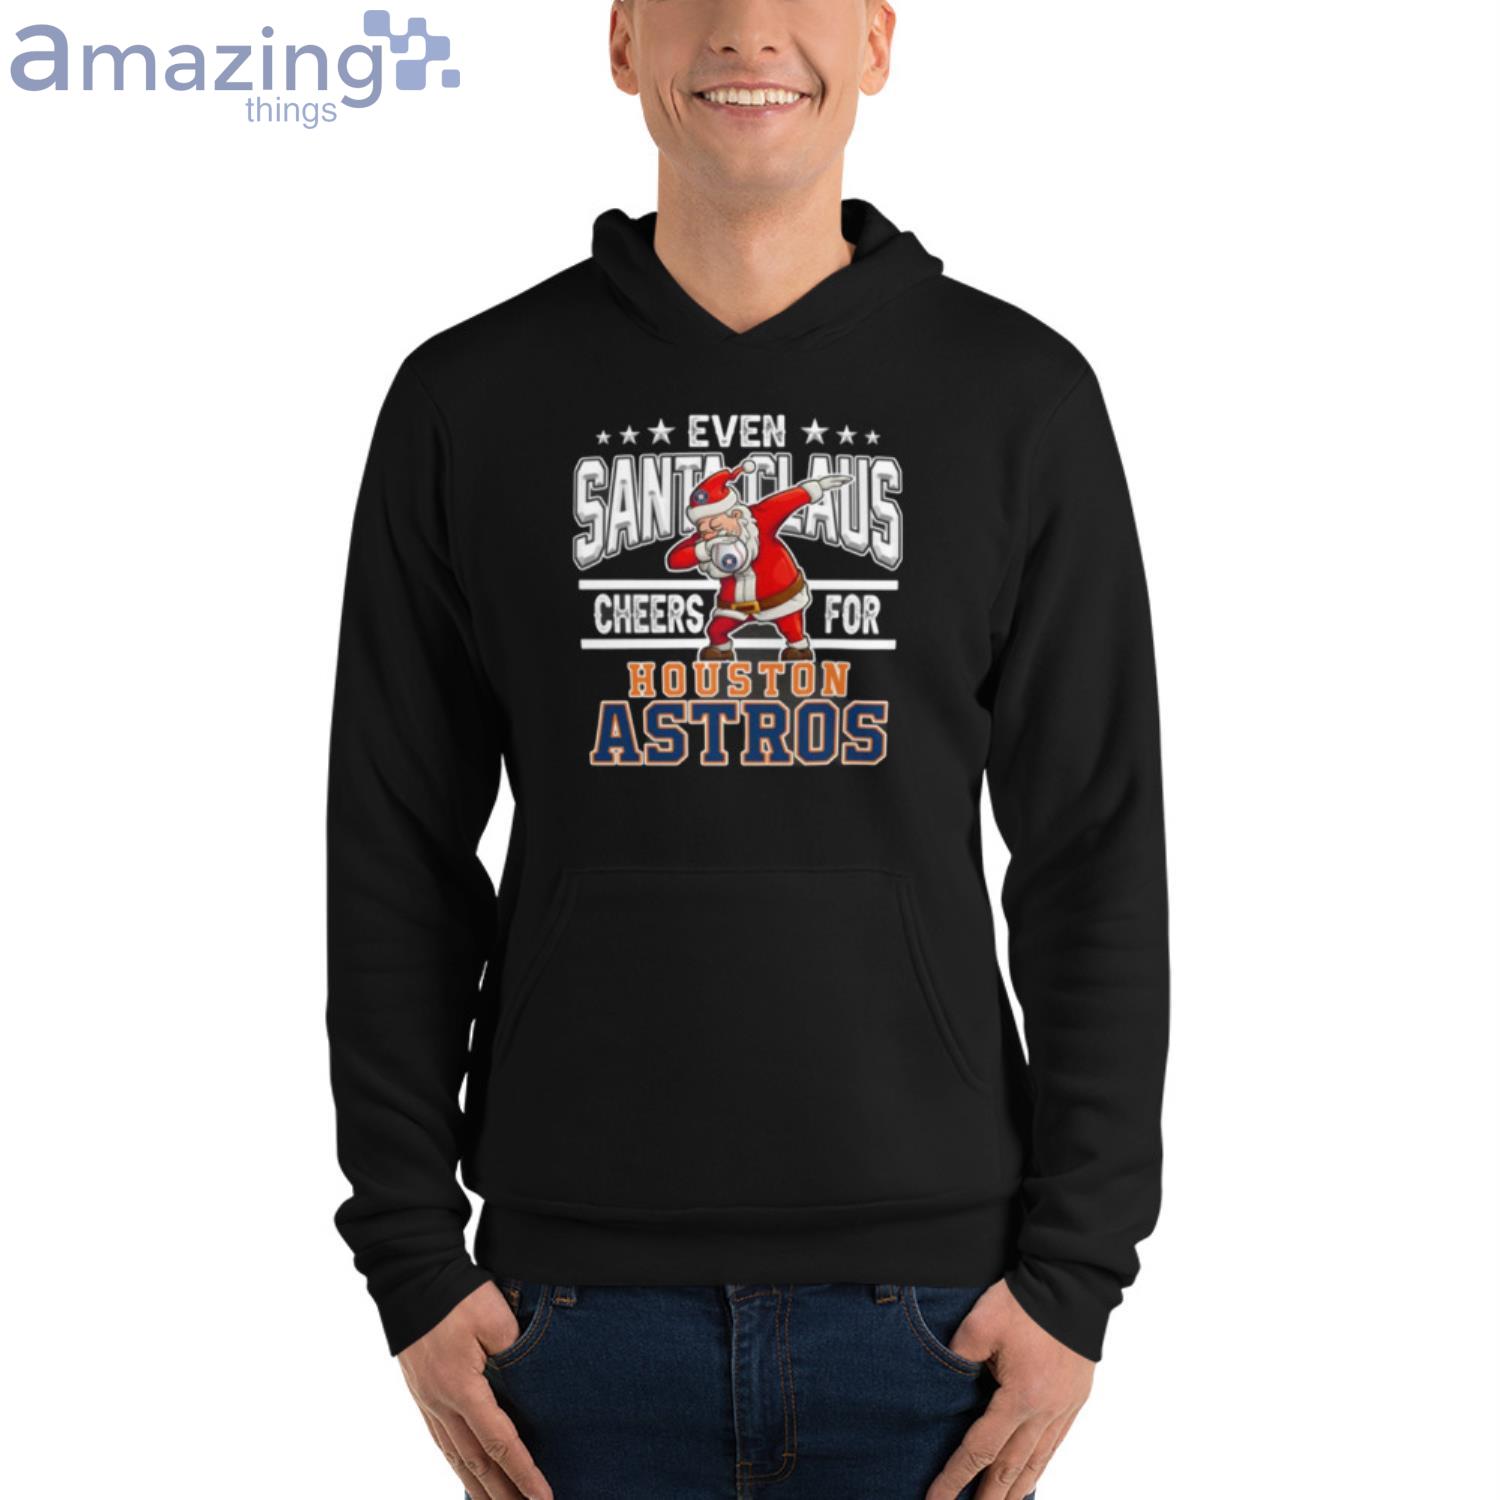 Houston Astros Womens Shirts, Houston Astros Christmas Gifts - Happy Place  for Music Lovers